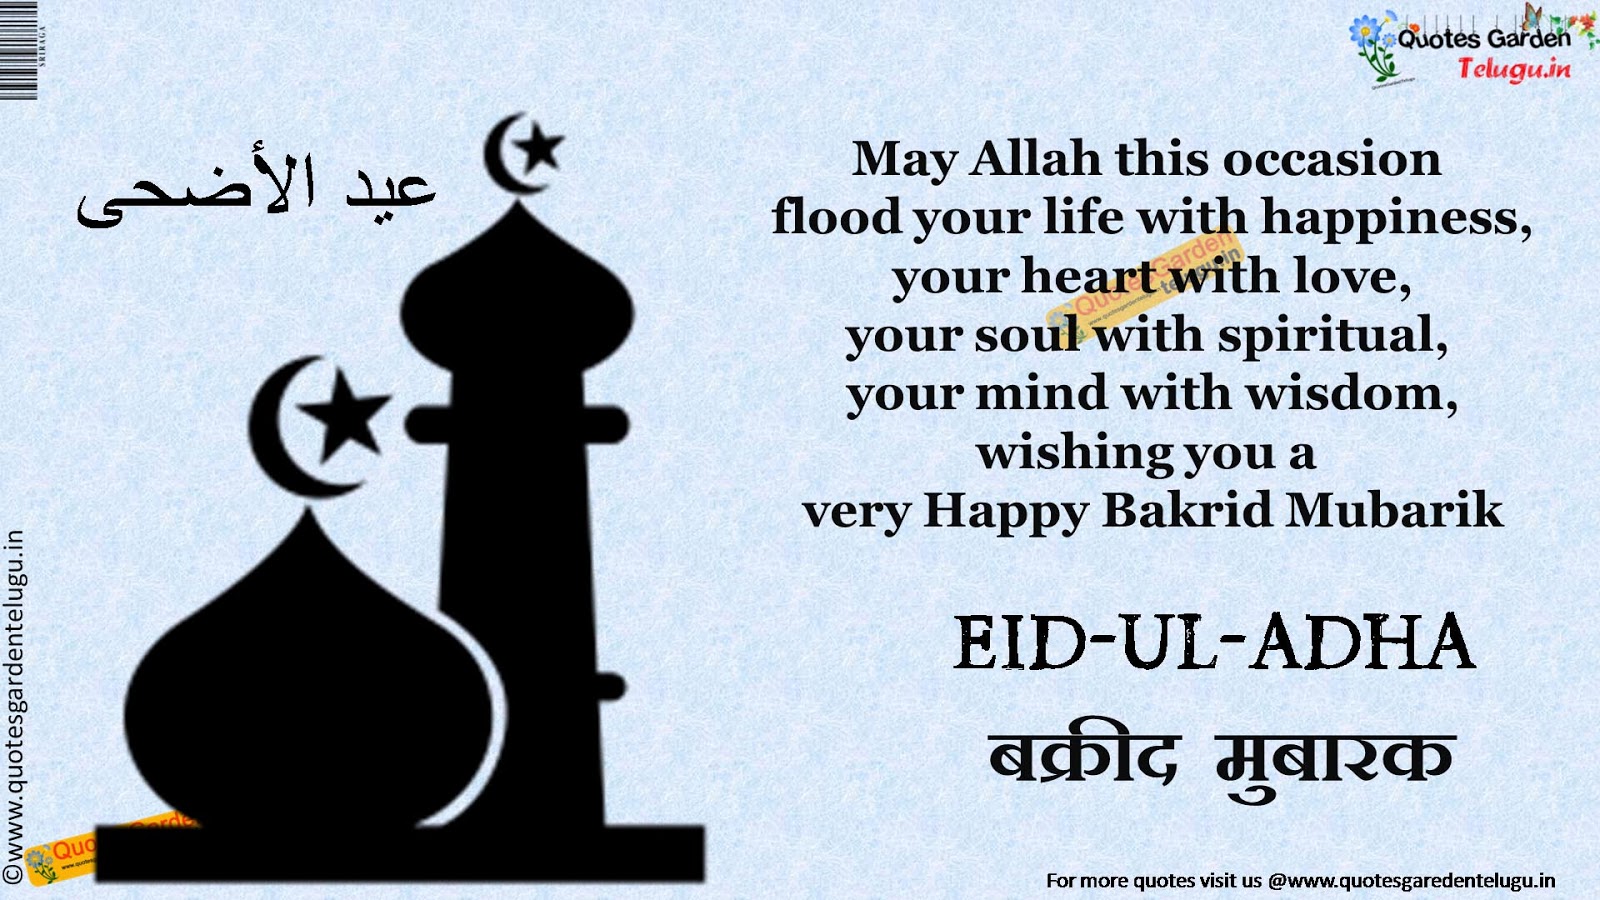 Best Bakrid 2015 Greetings Wishes Quotes Hindi 1136 | QUOTES ...